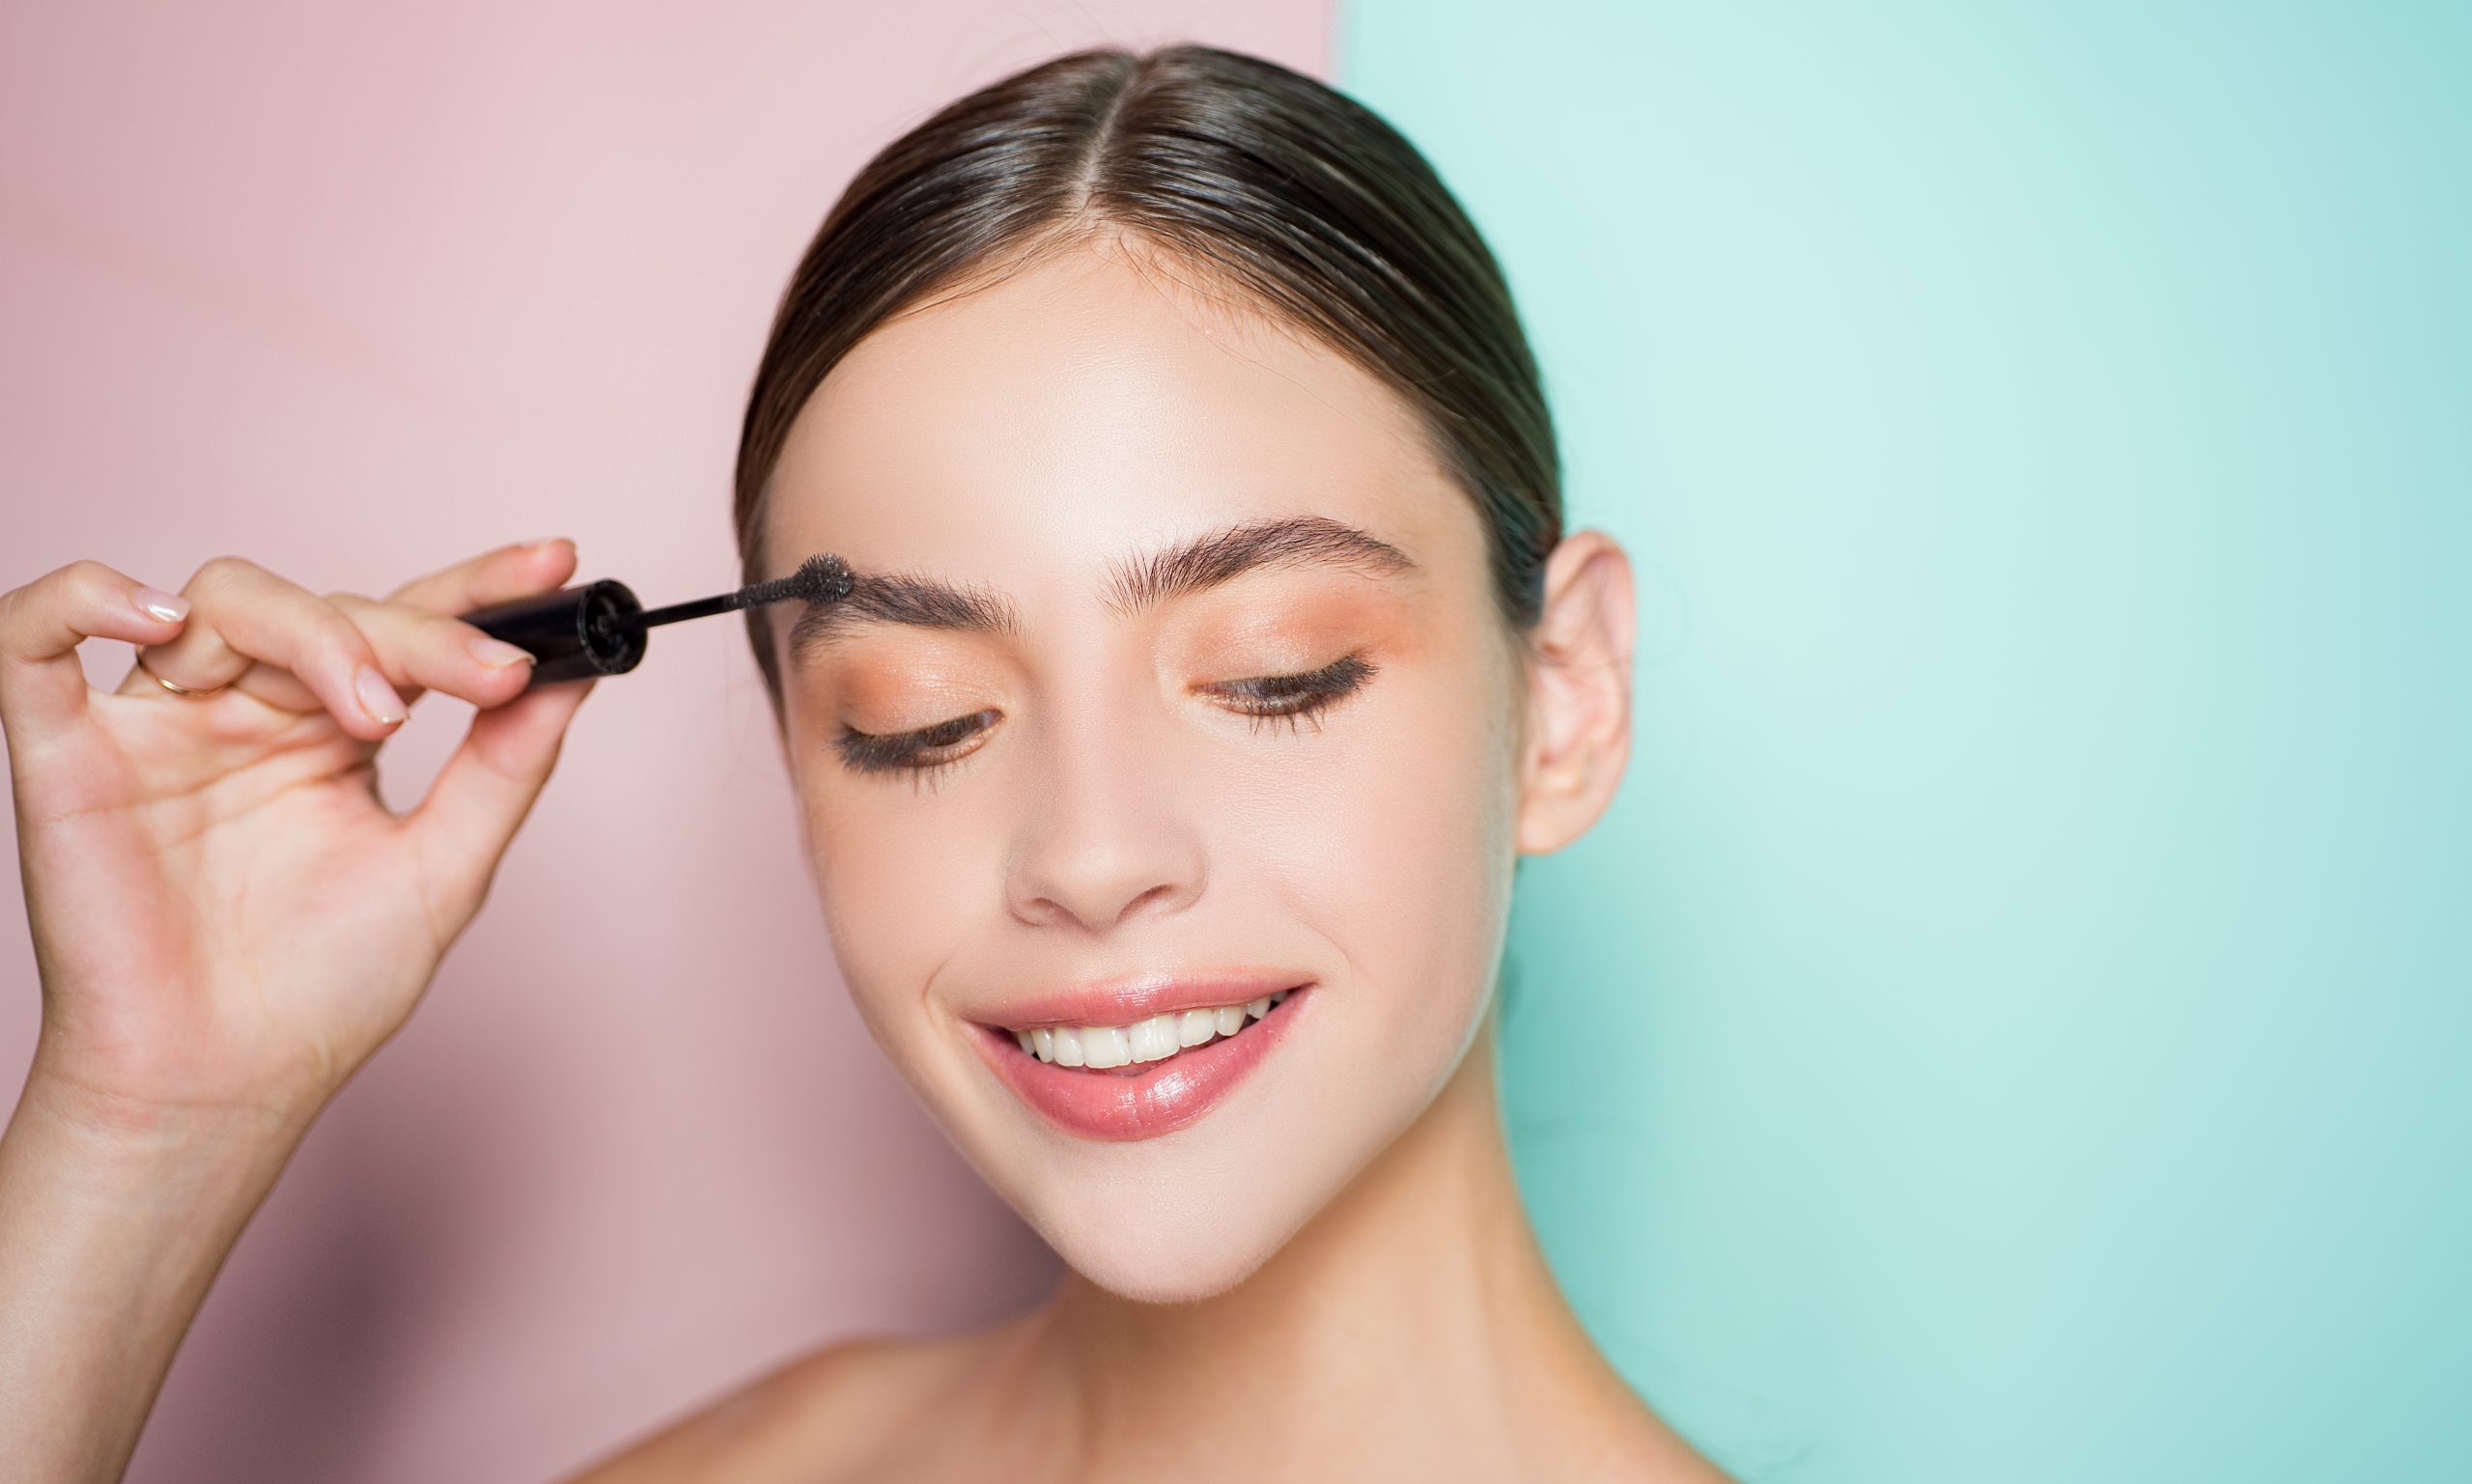 This eyebrow & make-up - what is gel needs your bag Wellbeing Health